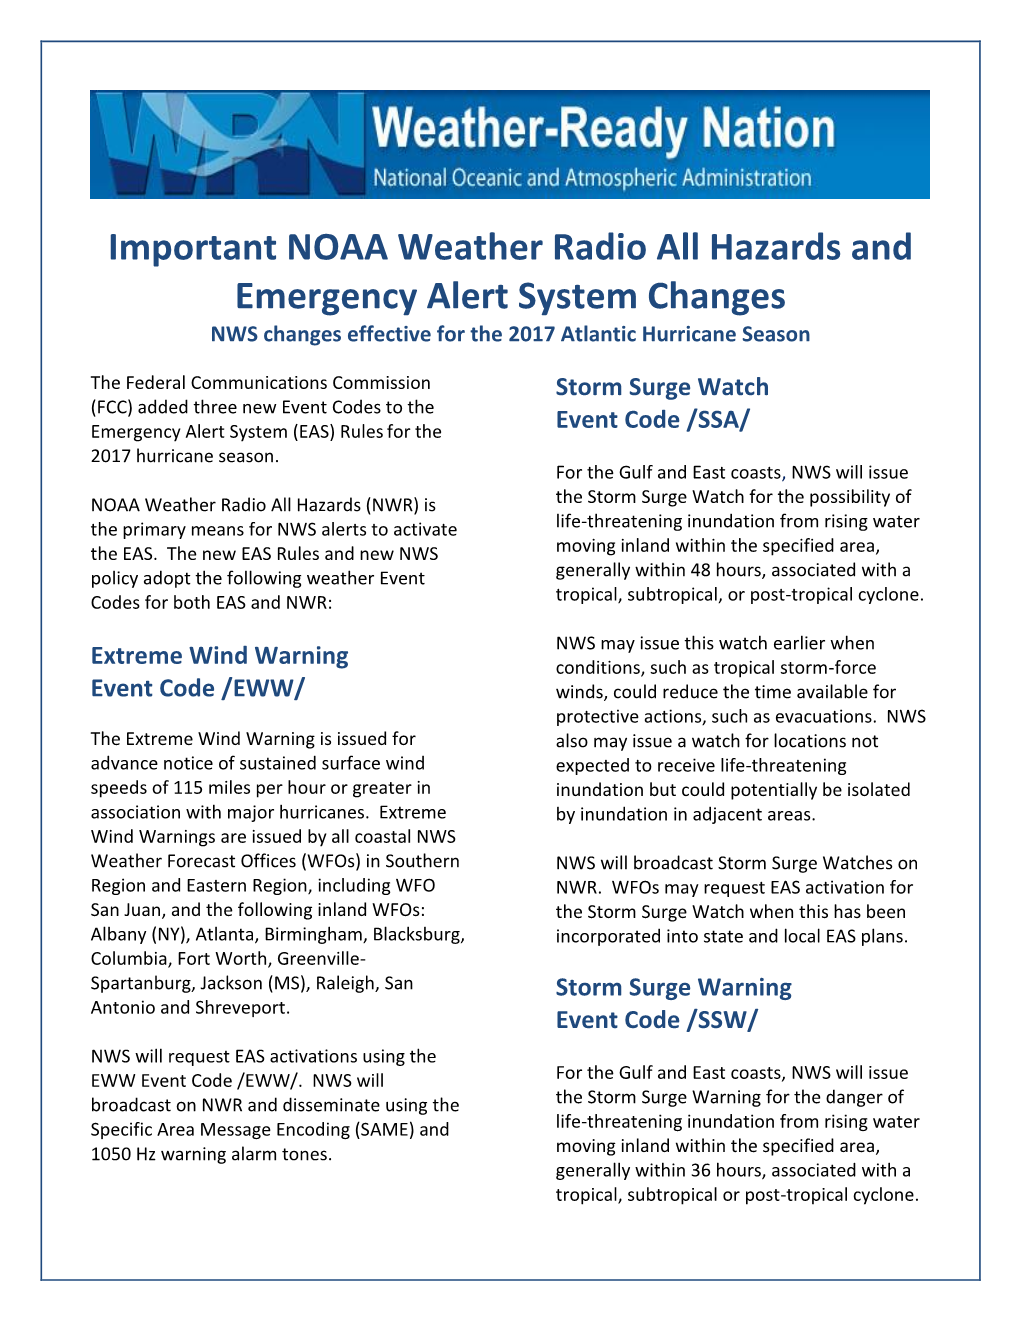 Important NOAA Weather Radio All Hazards and Emergency Alert System Changes NWS Changes Effective for the 2017 Atlantic Hurricane Season